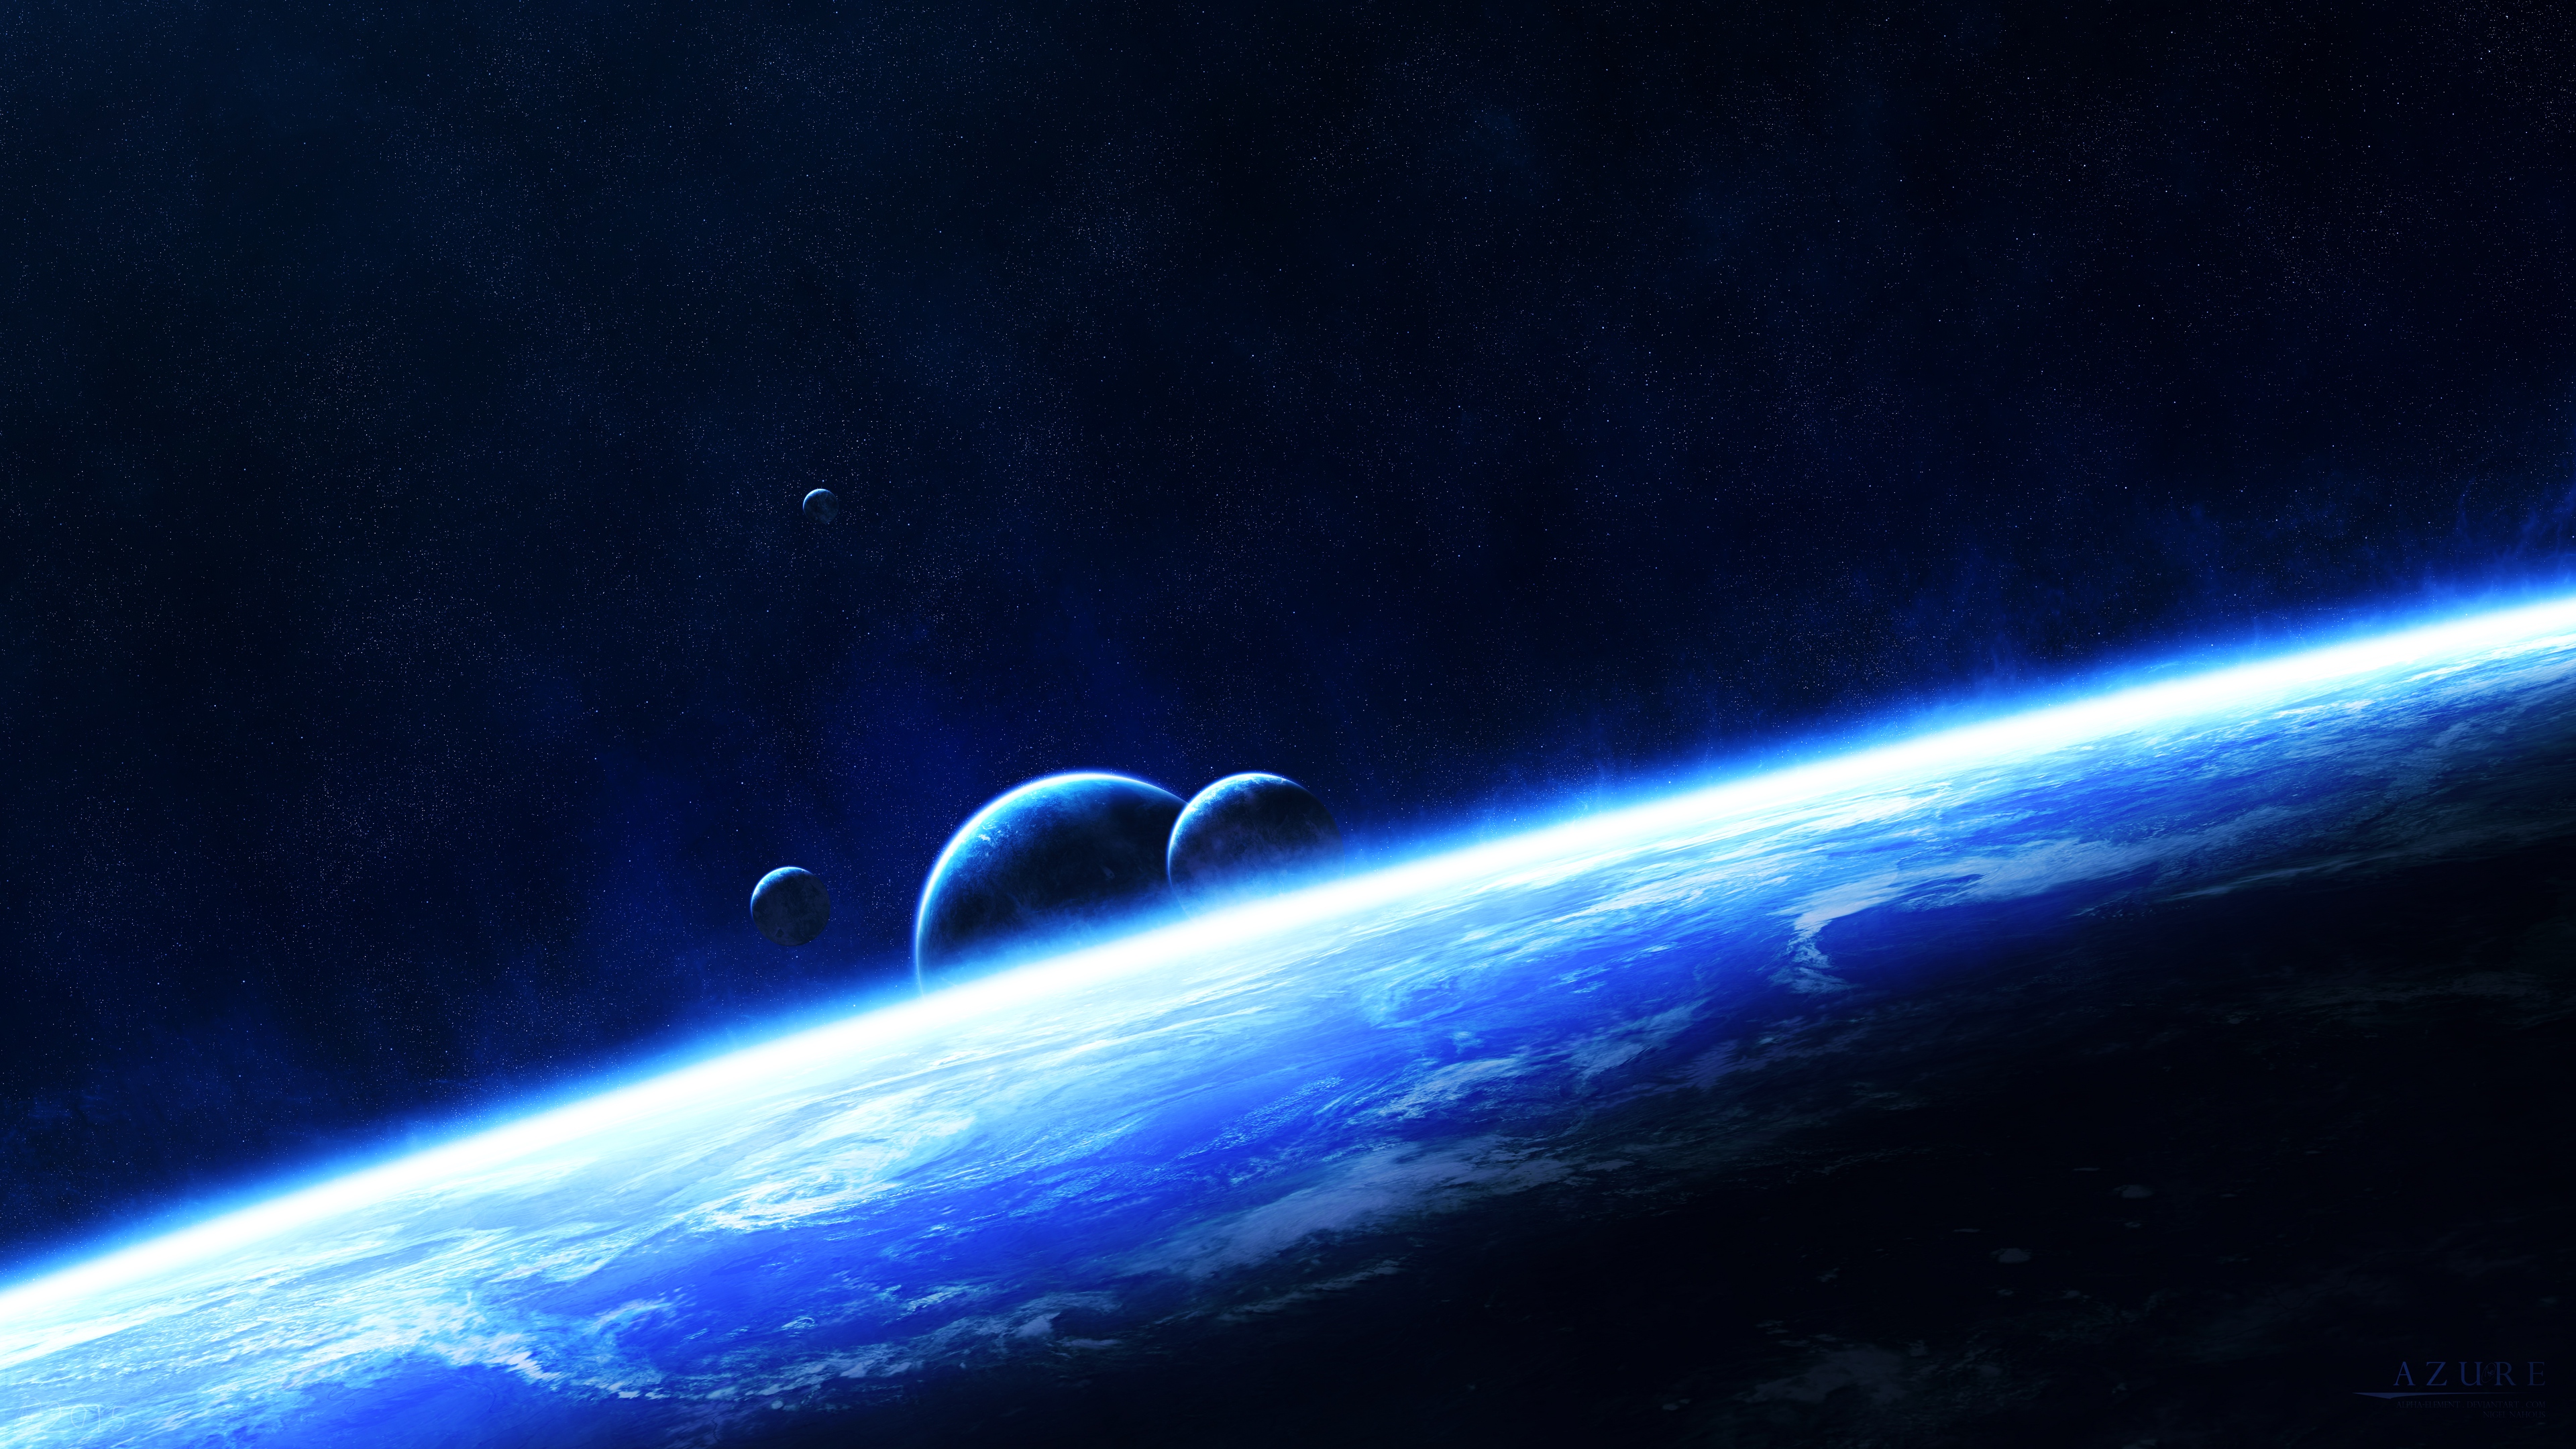 Wallpaper Planets, Space, Glow, Universe - Space Universe Wallpaper 4k -  3840x2160 Wallpaper 